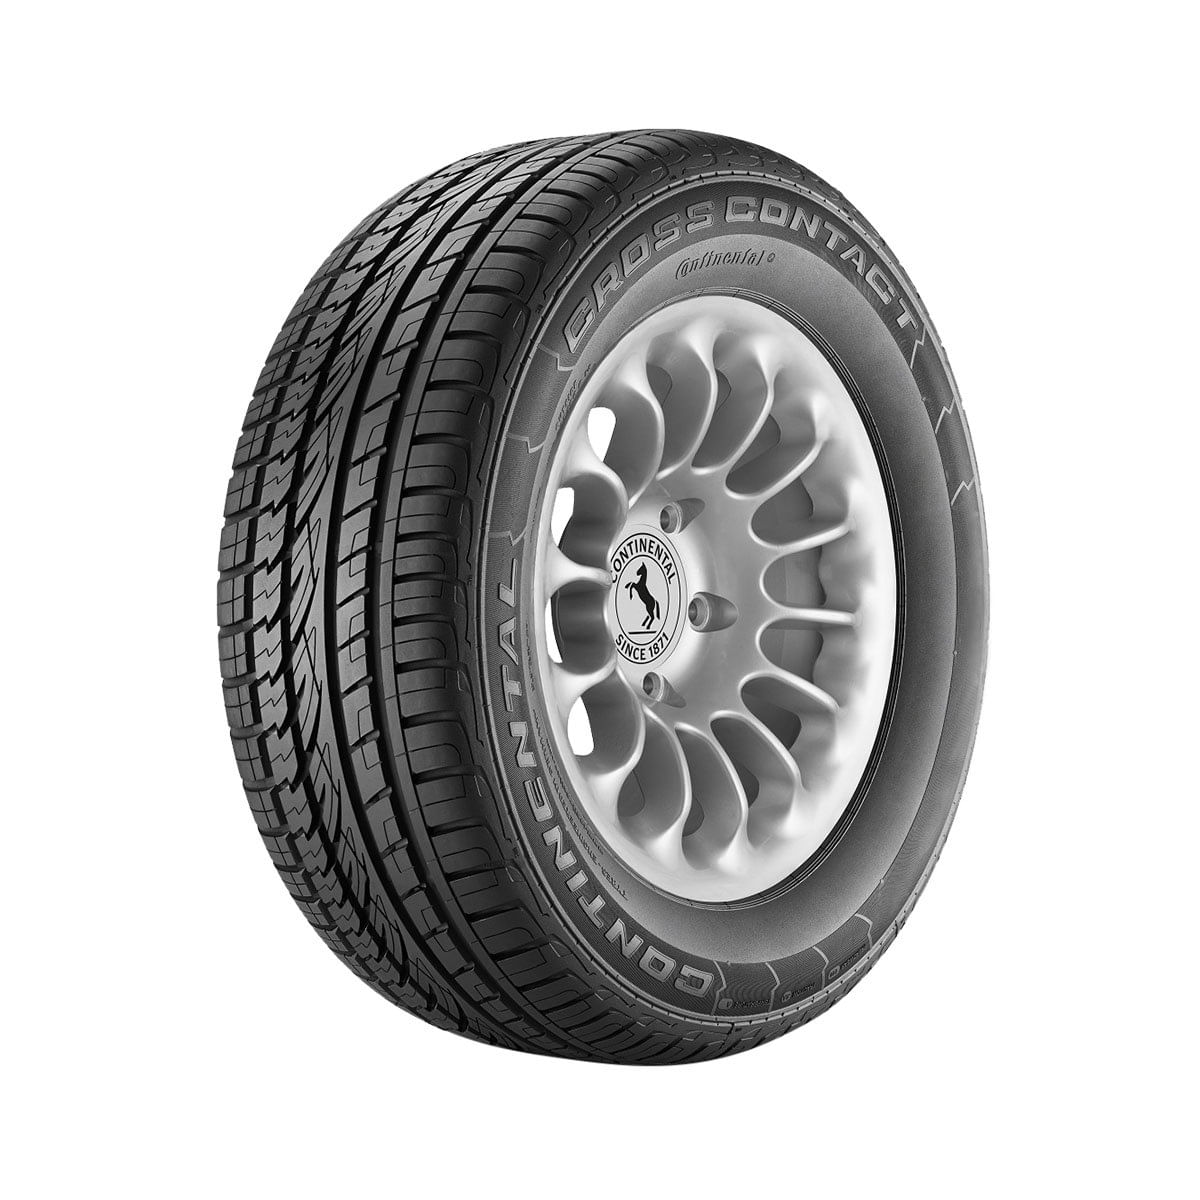 5745217_Pneu Aro 20 295/40 R 20 Continental CrossContact UHP 3548900000_1_Zoom